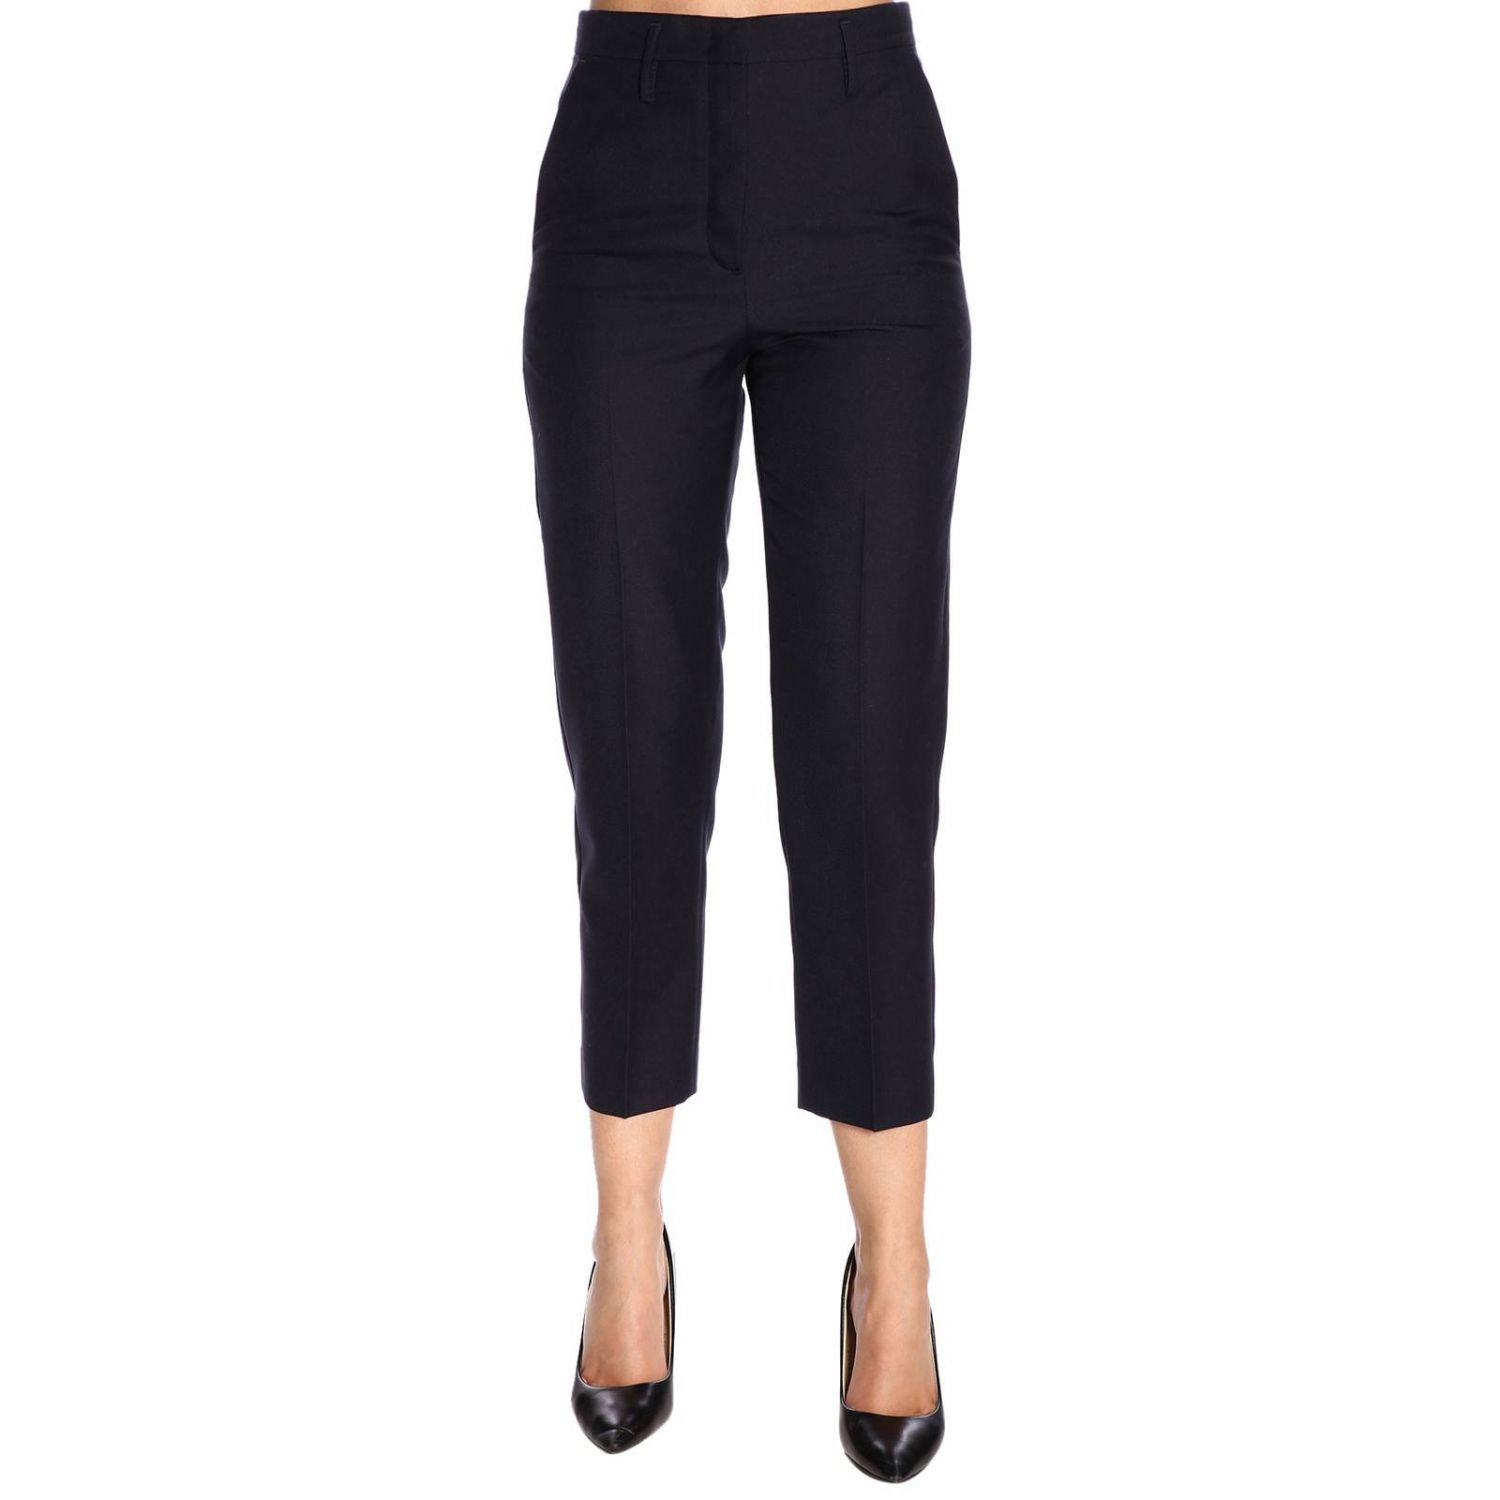 Golden Goose Outlet: pants for woman - Navy | Golden Goose pants ...